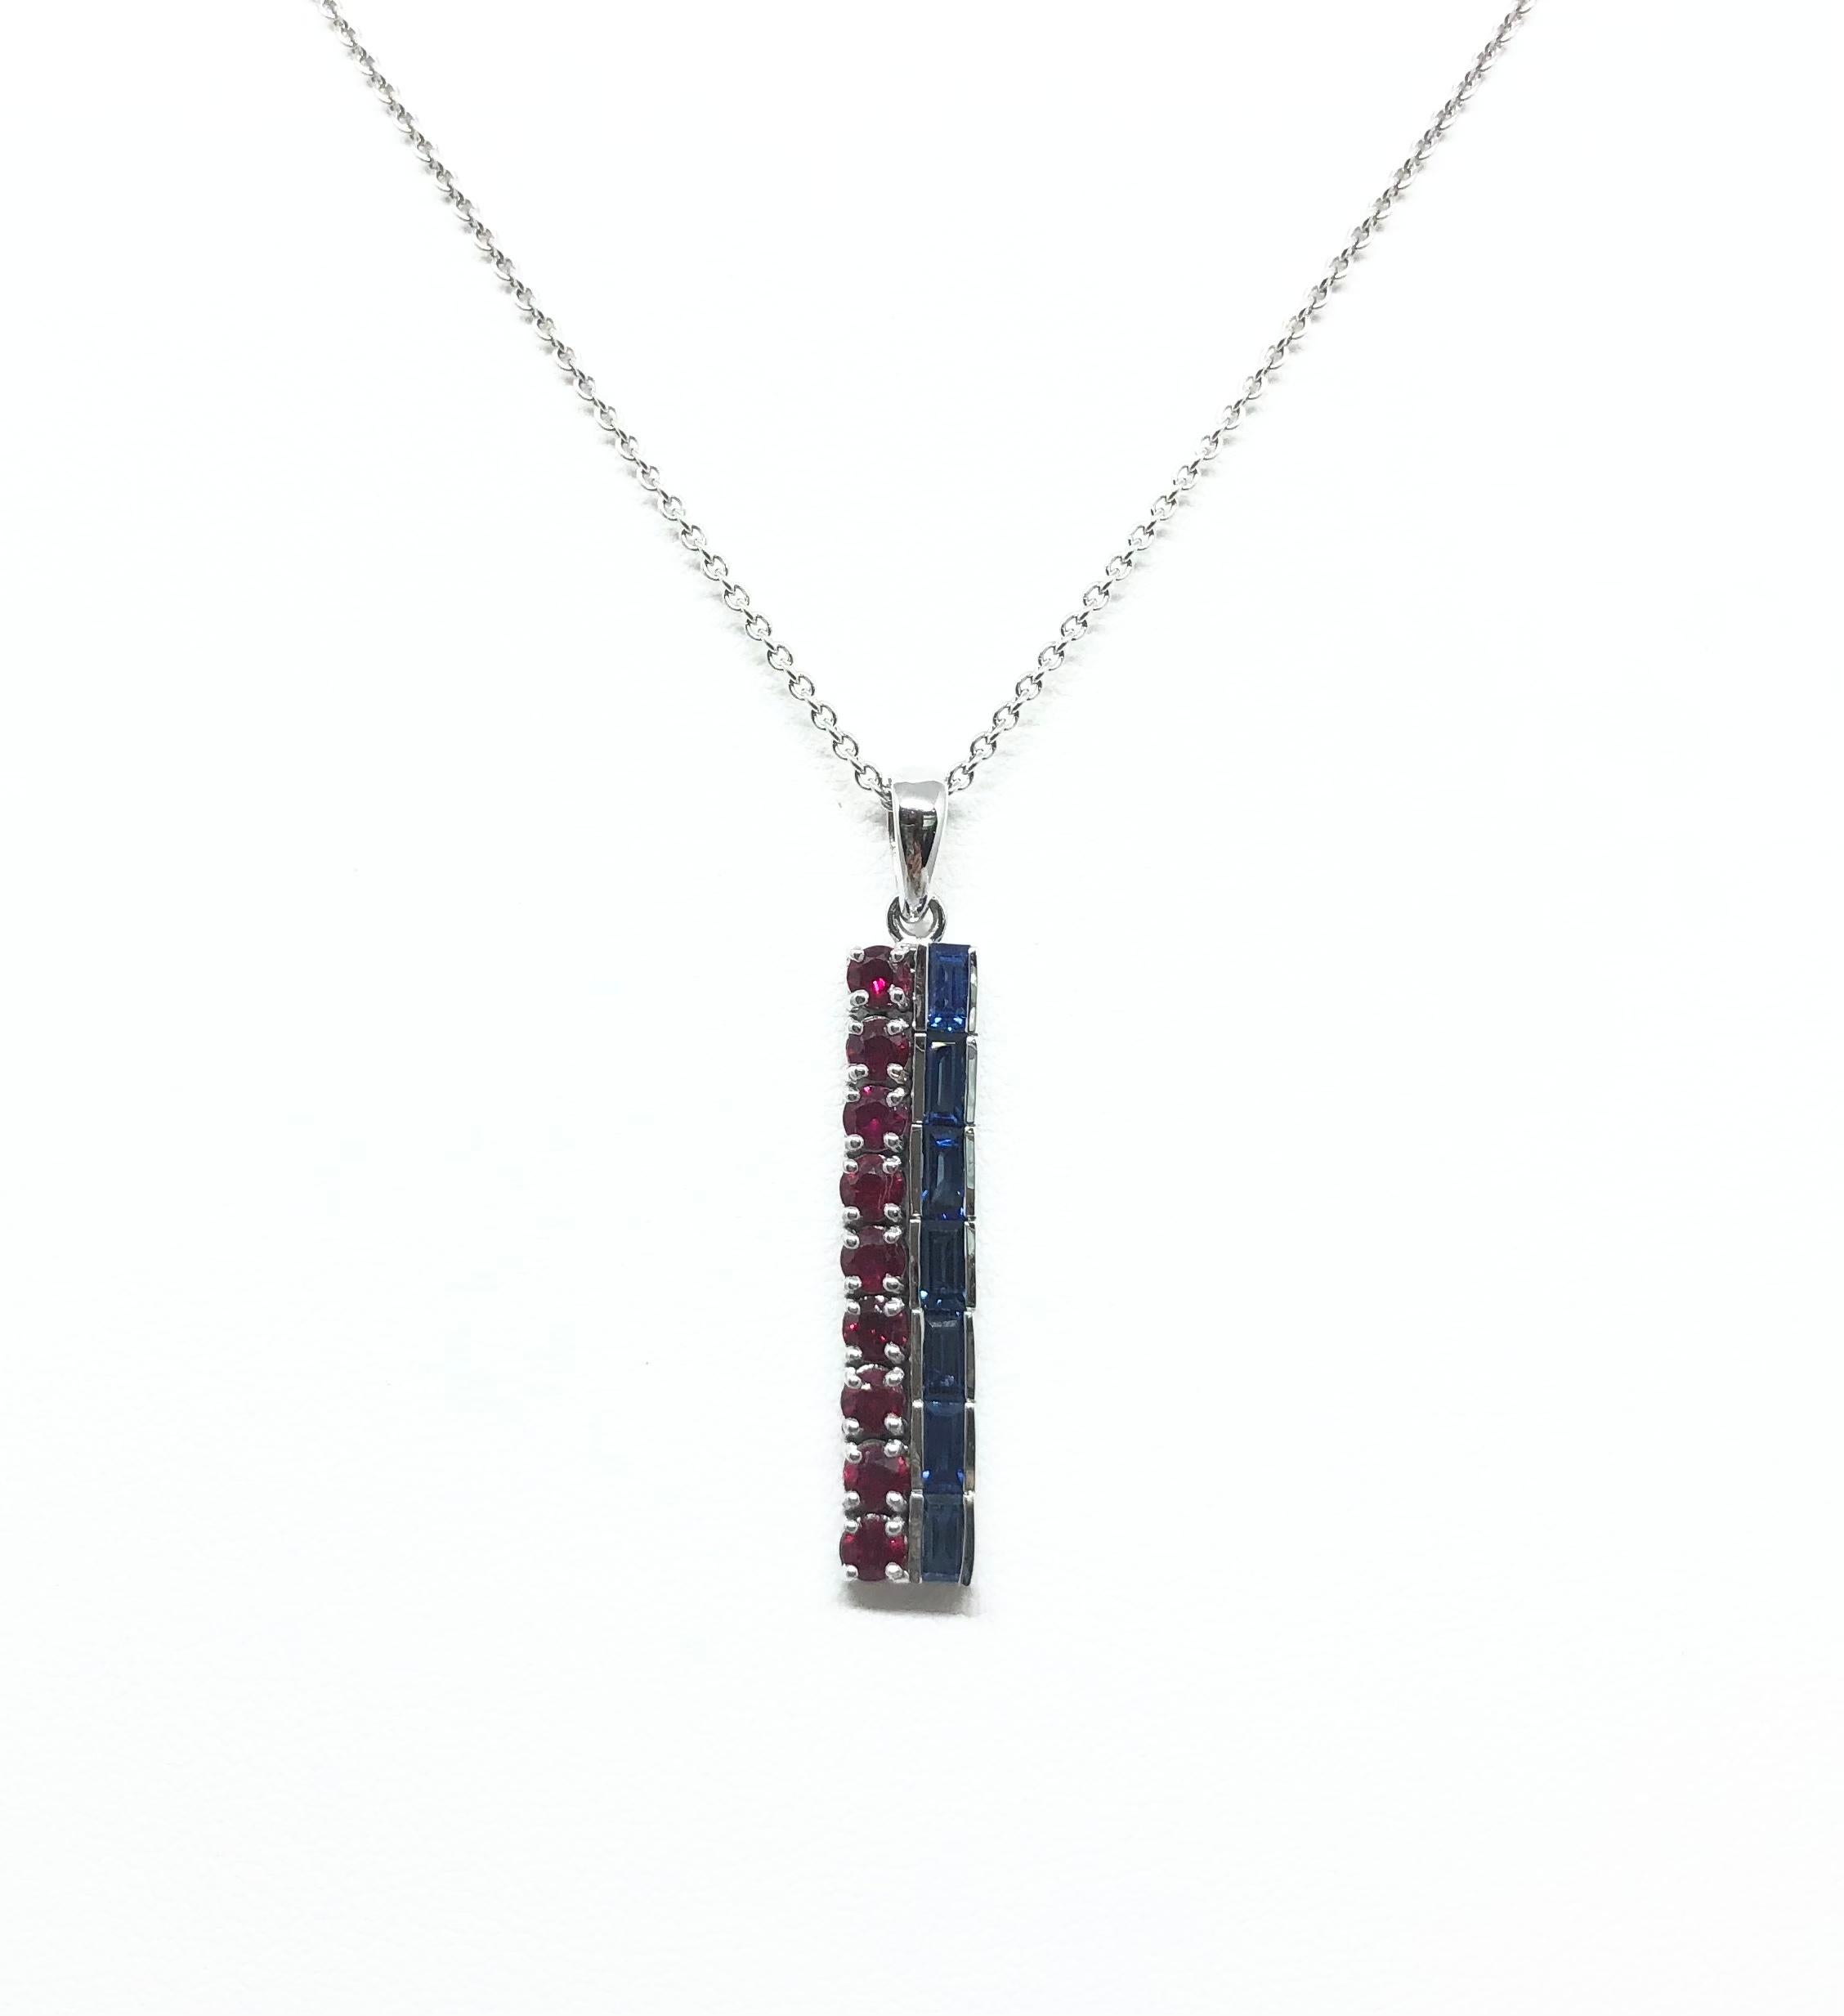 Blue Sapphire 1.03 carats and Ruby 0.90 carat Pendant set in 18 Karat White Gold Settings
(chain not included)

Width: 0.6 cm 
Length: 3.6 cm
Total Weight: 4.27 grams

